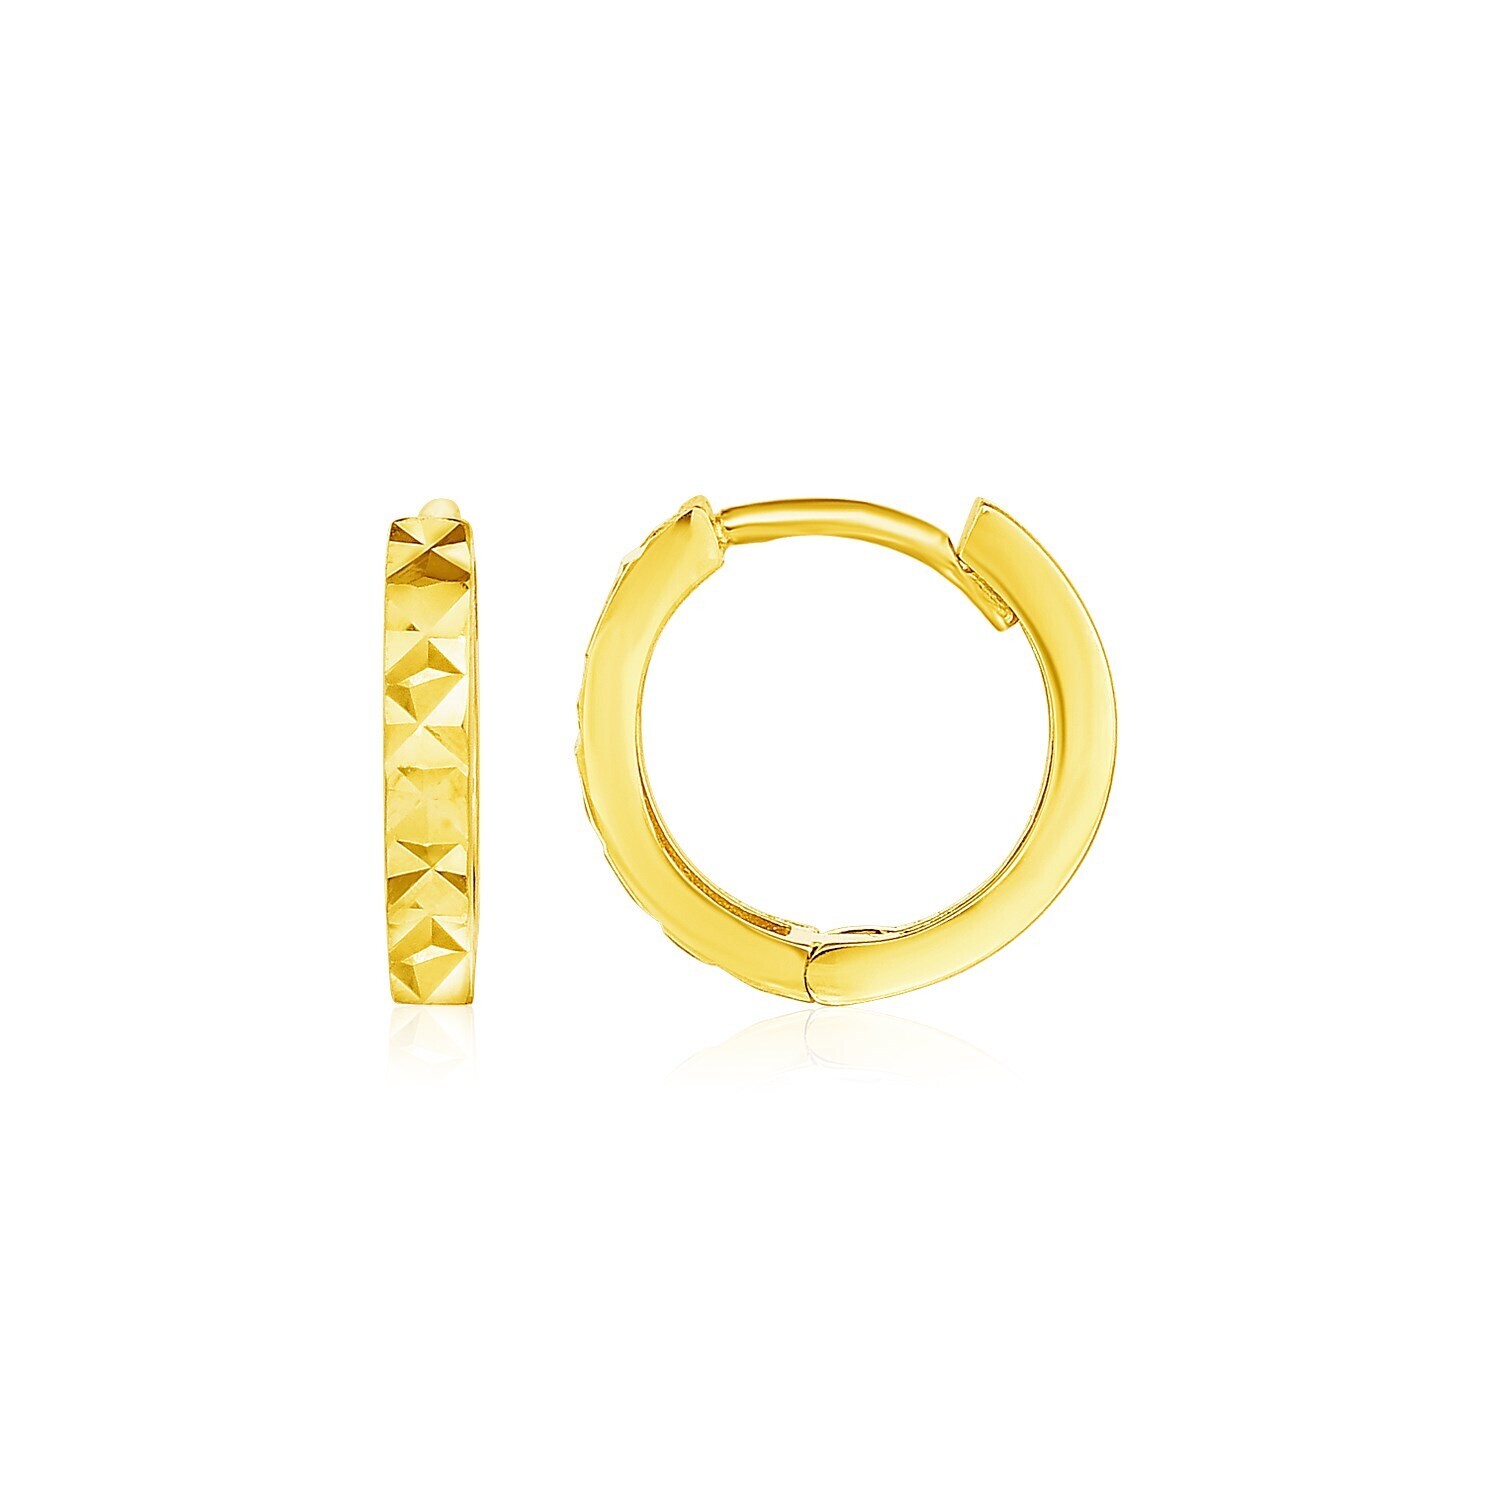 14k Yellow Gold Petite Round Hoop Earrings with Geometric Texture